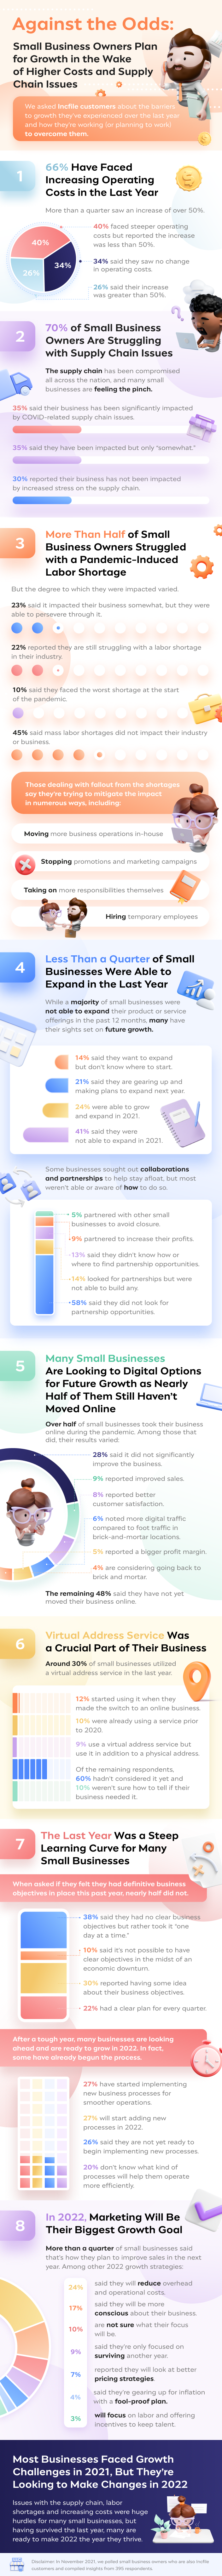 small-business-owners-growth-survey